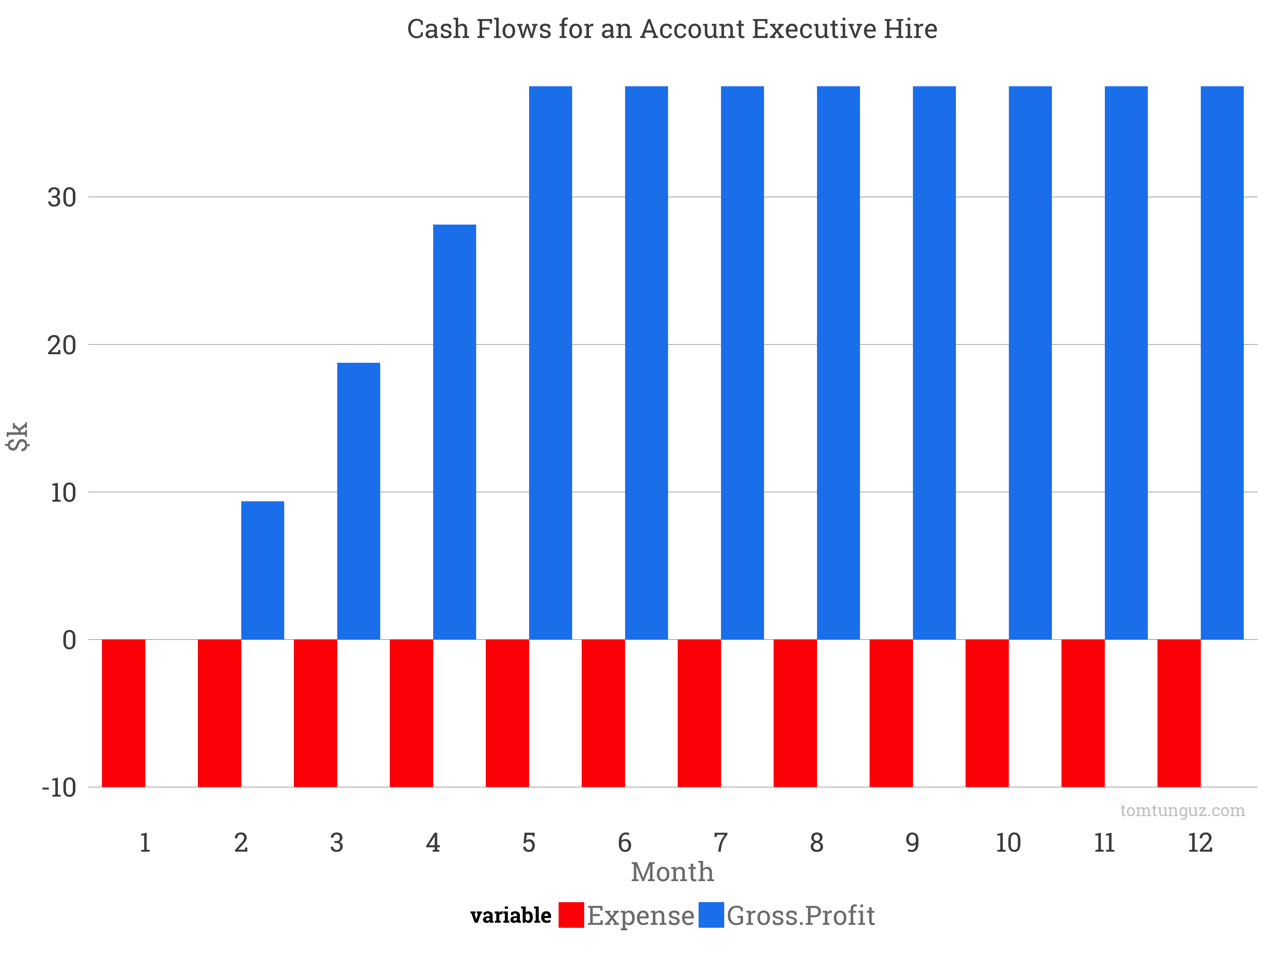 Cash flows for an account executive hire